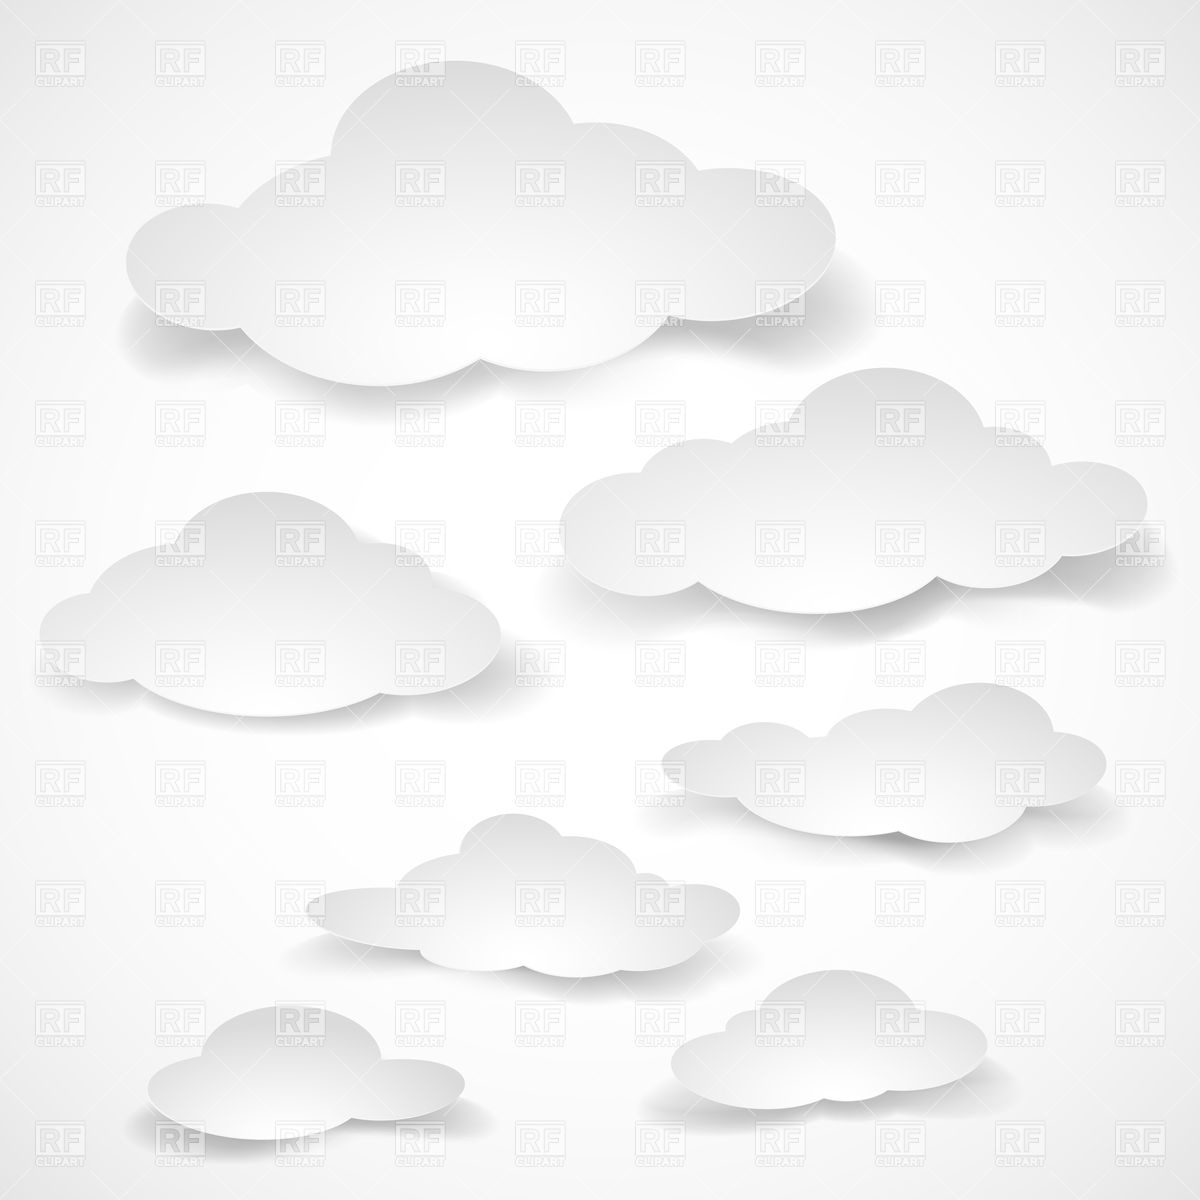 Clouds Of Different Size Download Royalty Free Vector Clipart  Eps